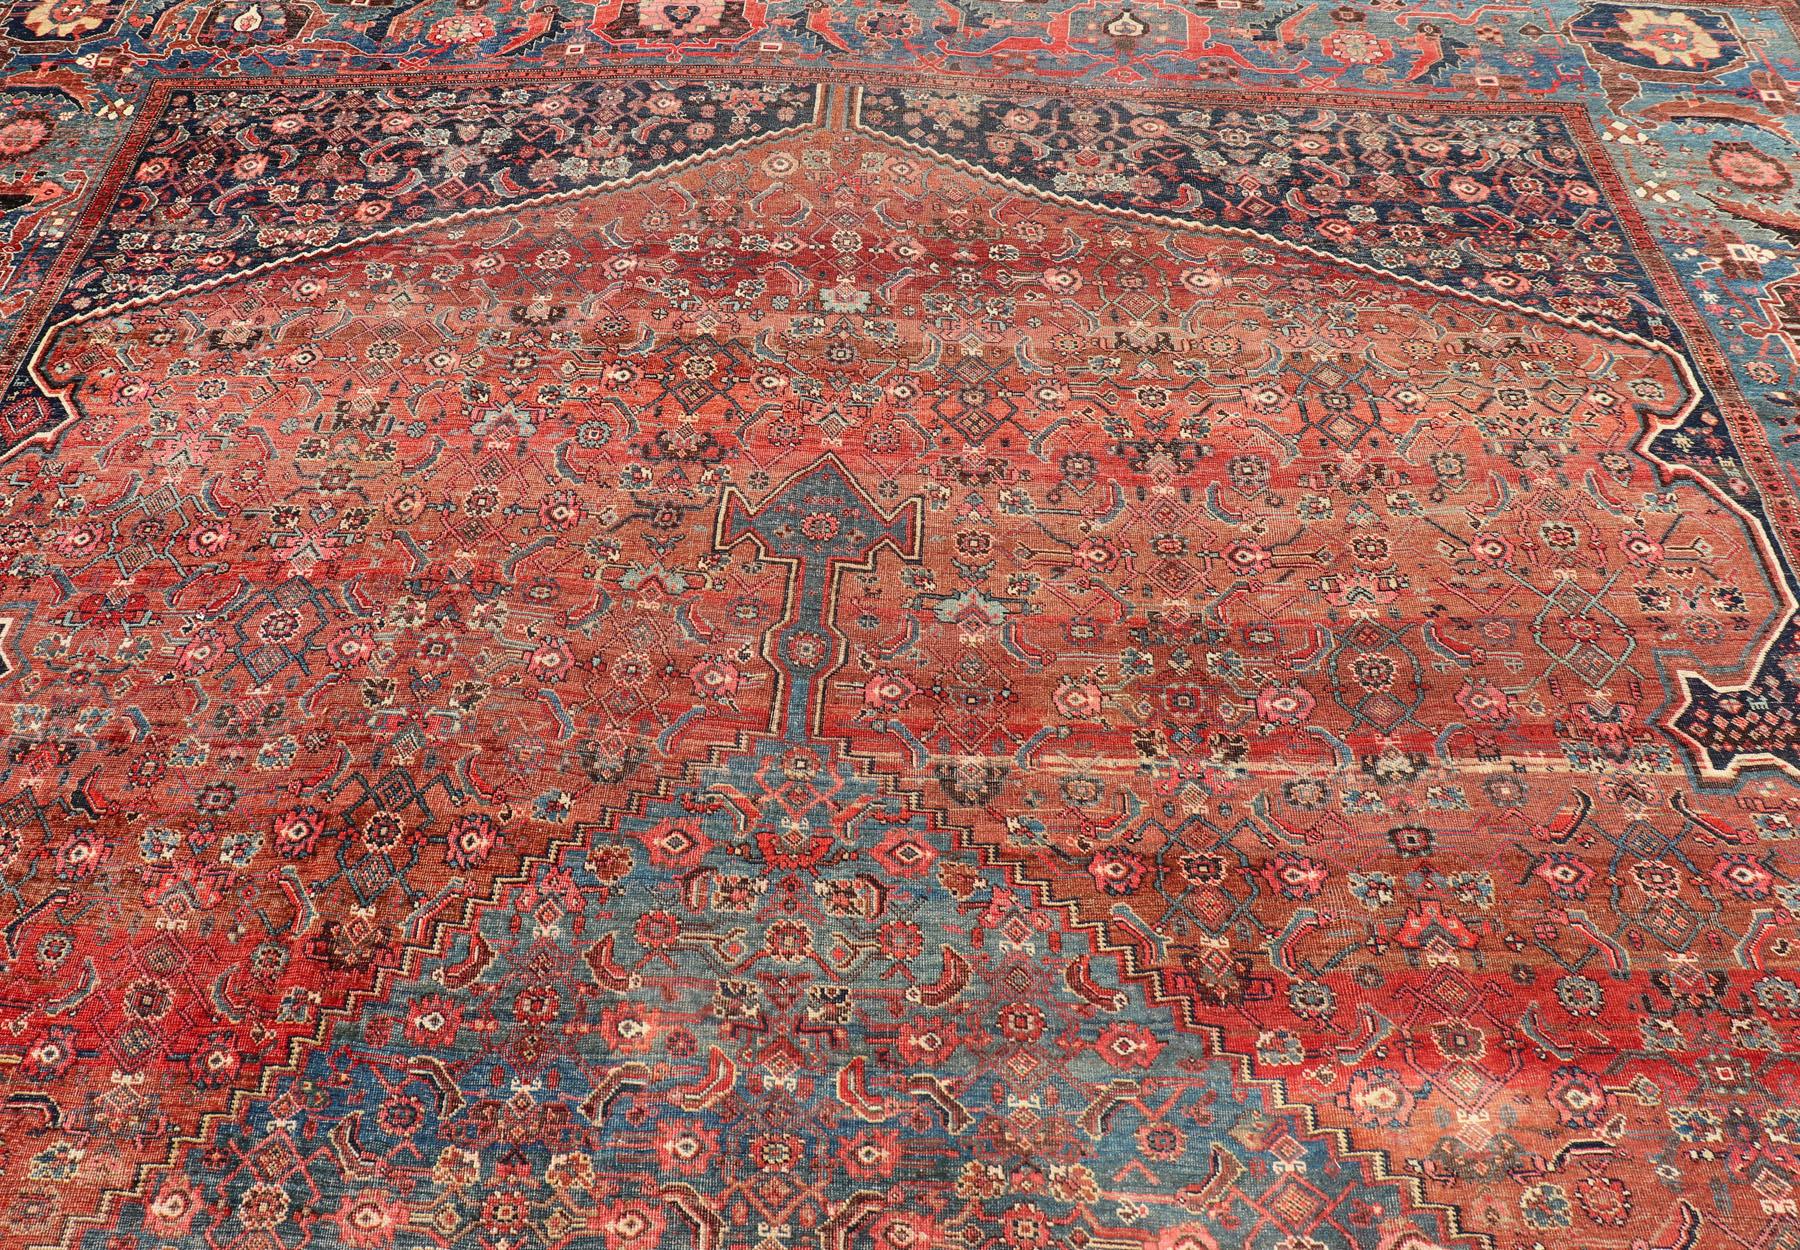 Very Large Antique Persian Bidjar Rug in Multi Shades of Blue, Tera-Cotta & Red For Sale 5